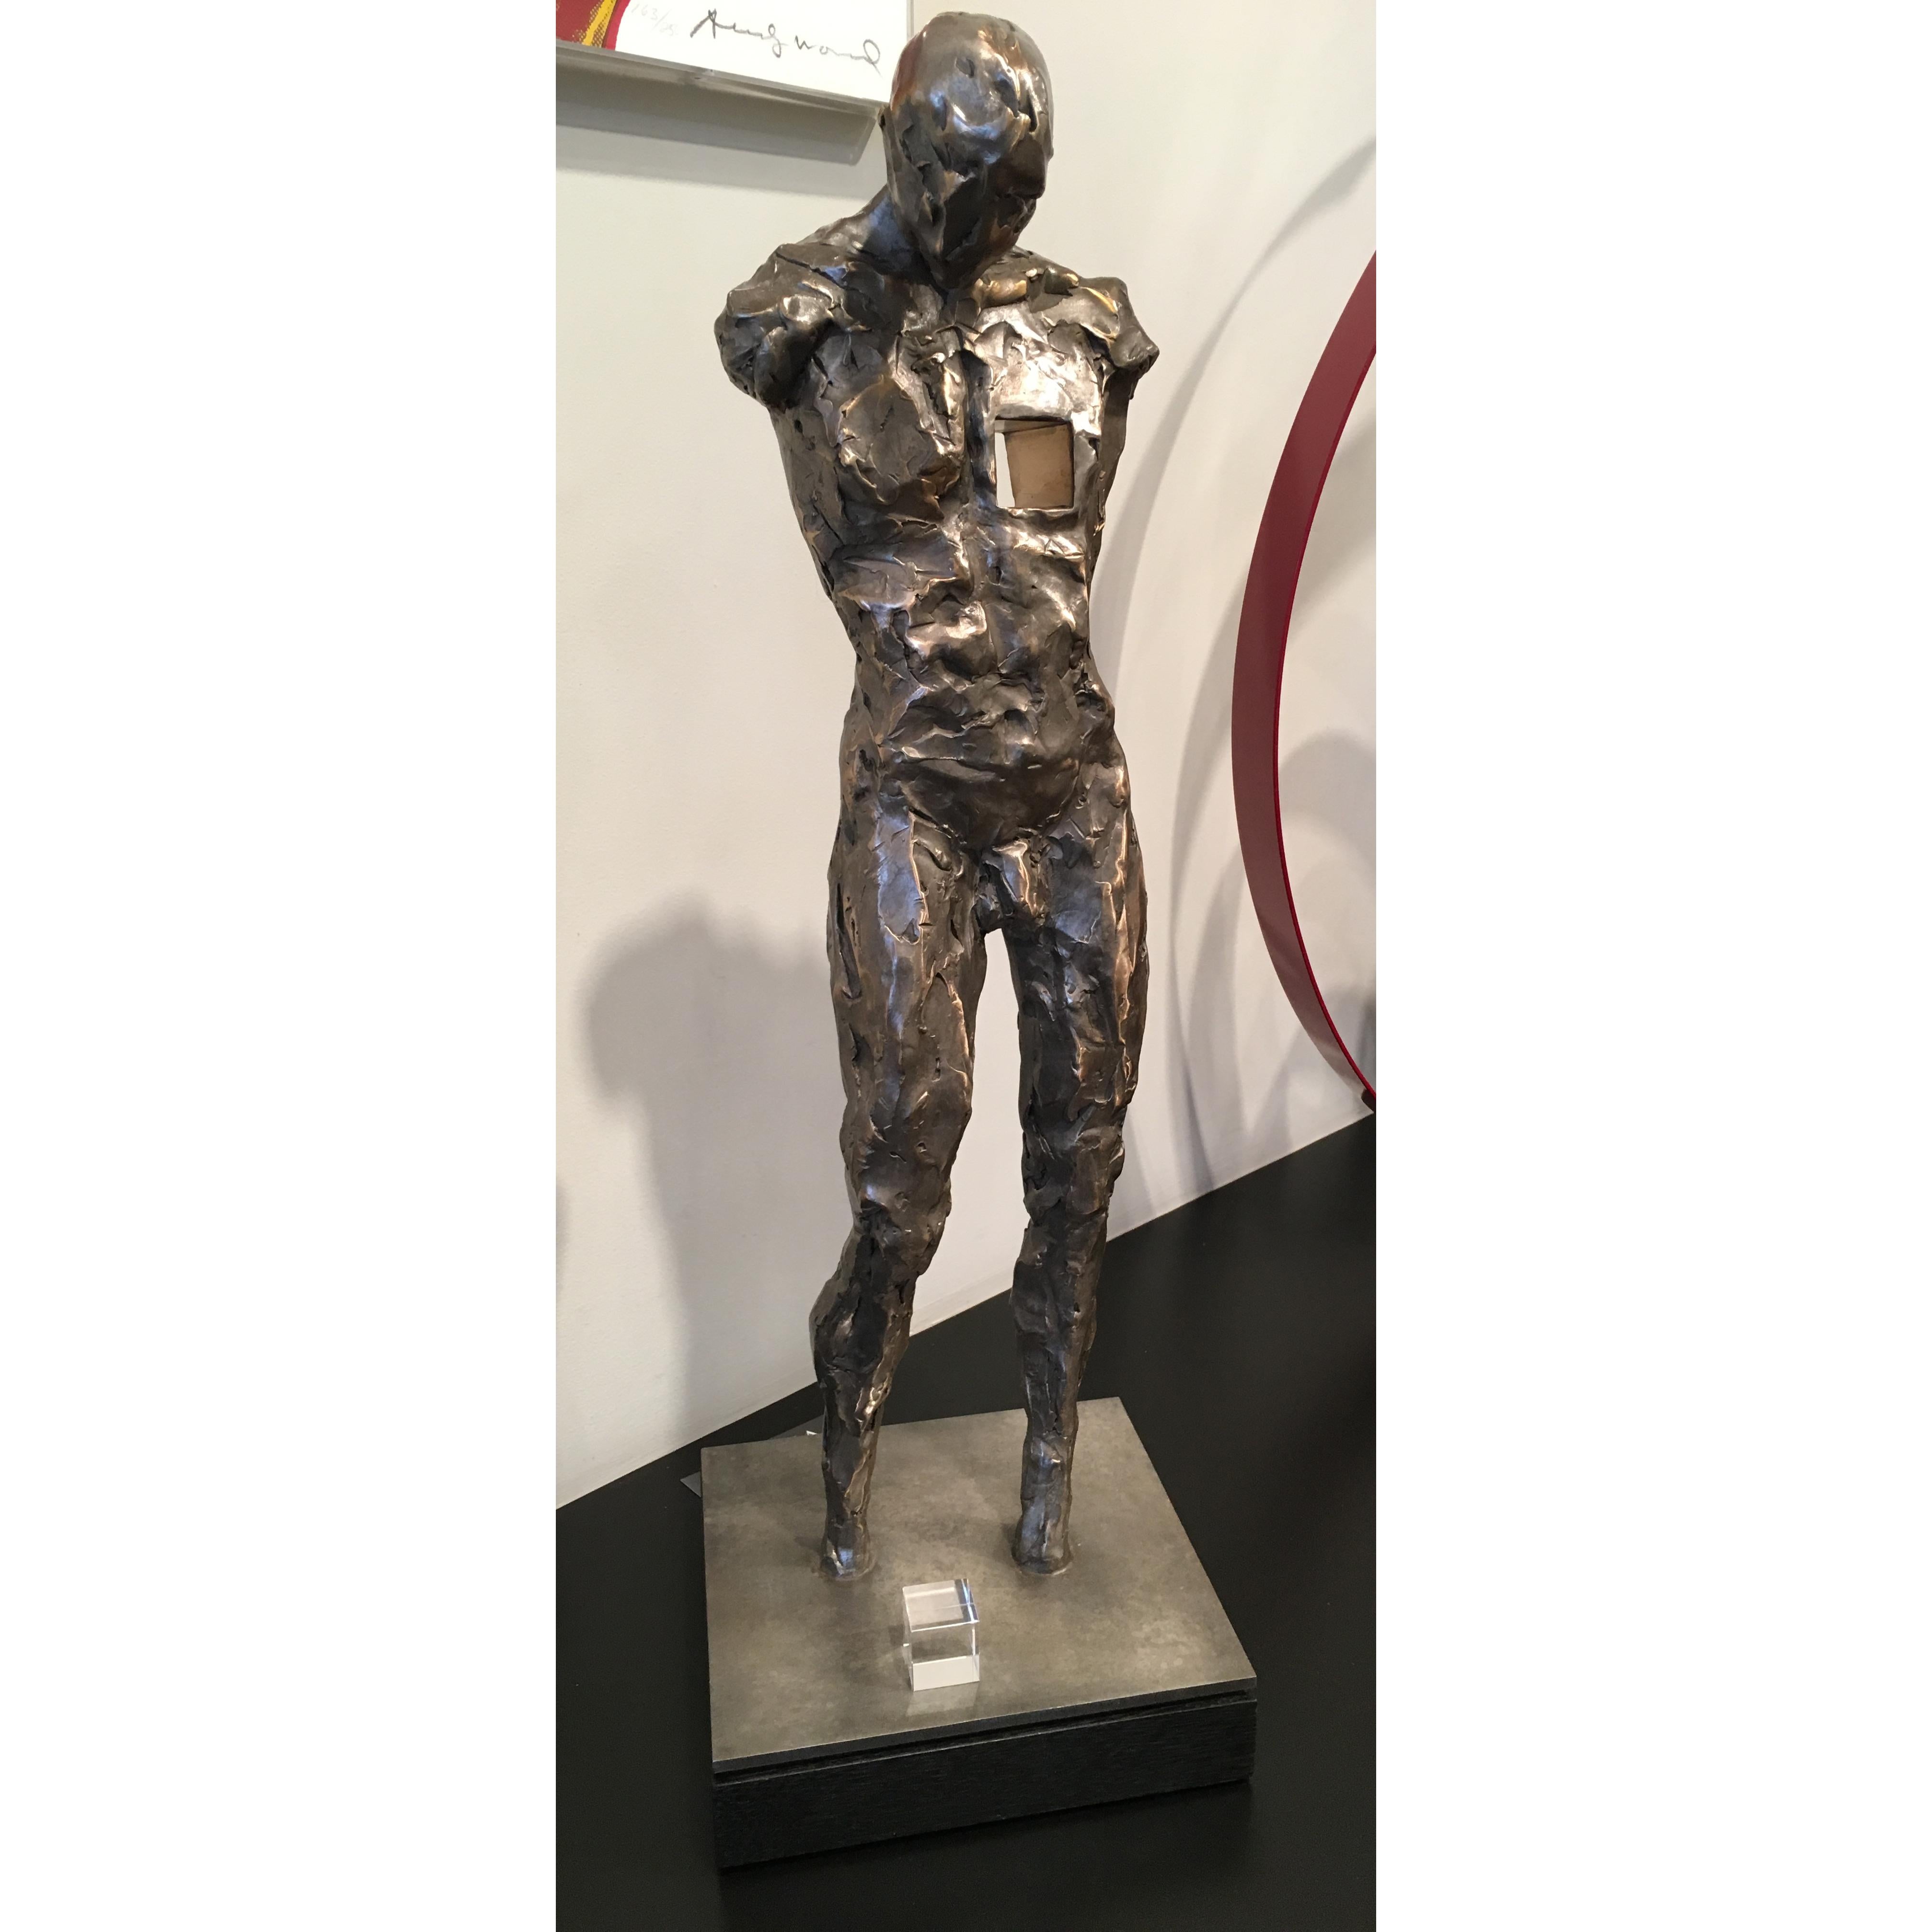 Gail Folwell Figurative Sculpture - Part of Me -Male 1/9